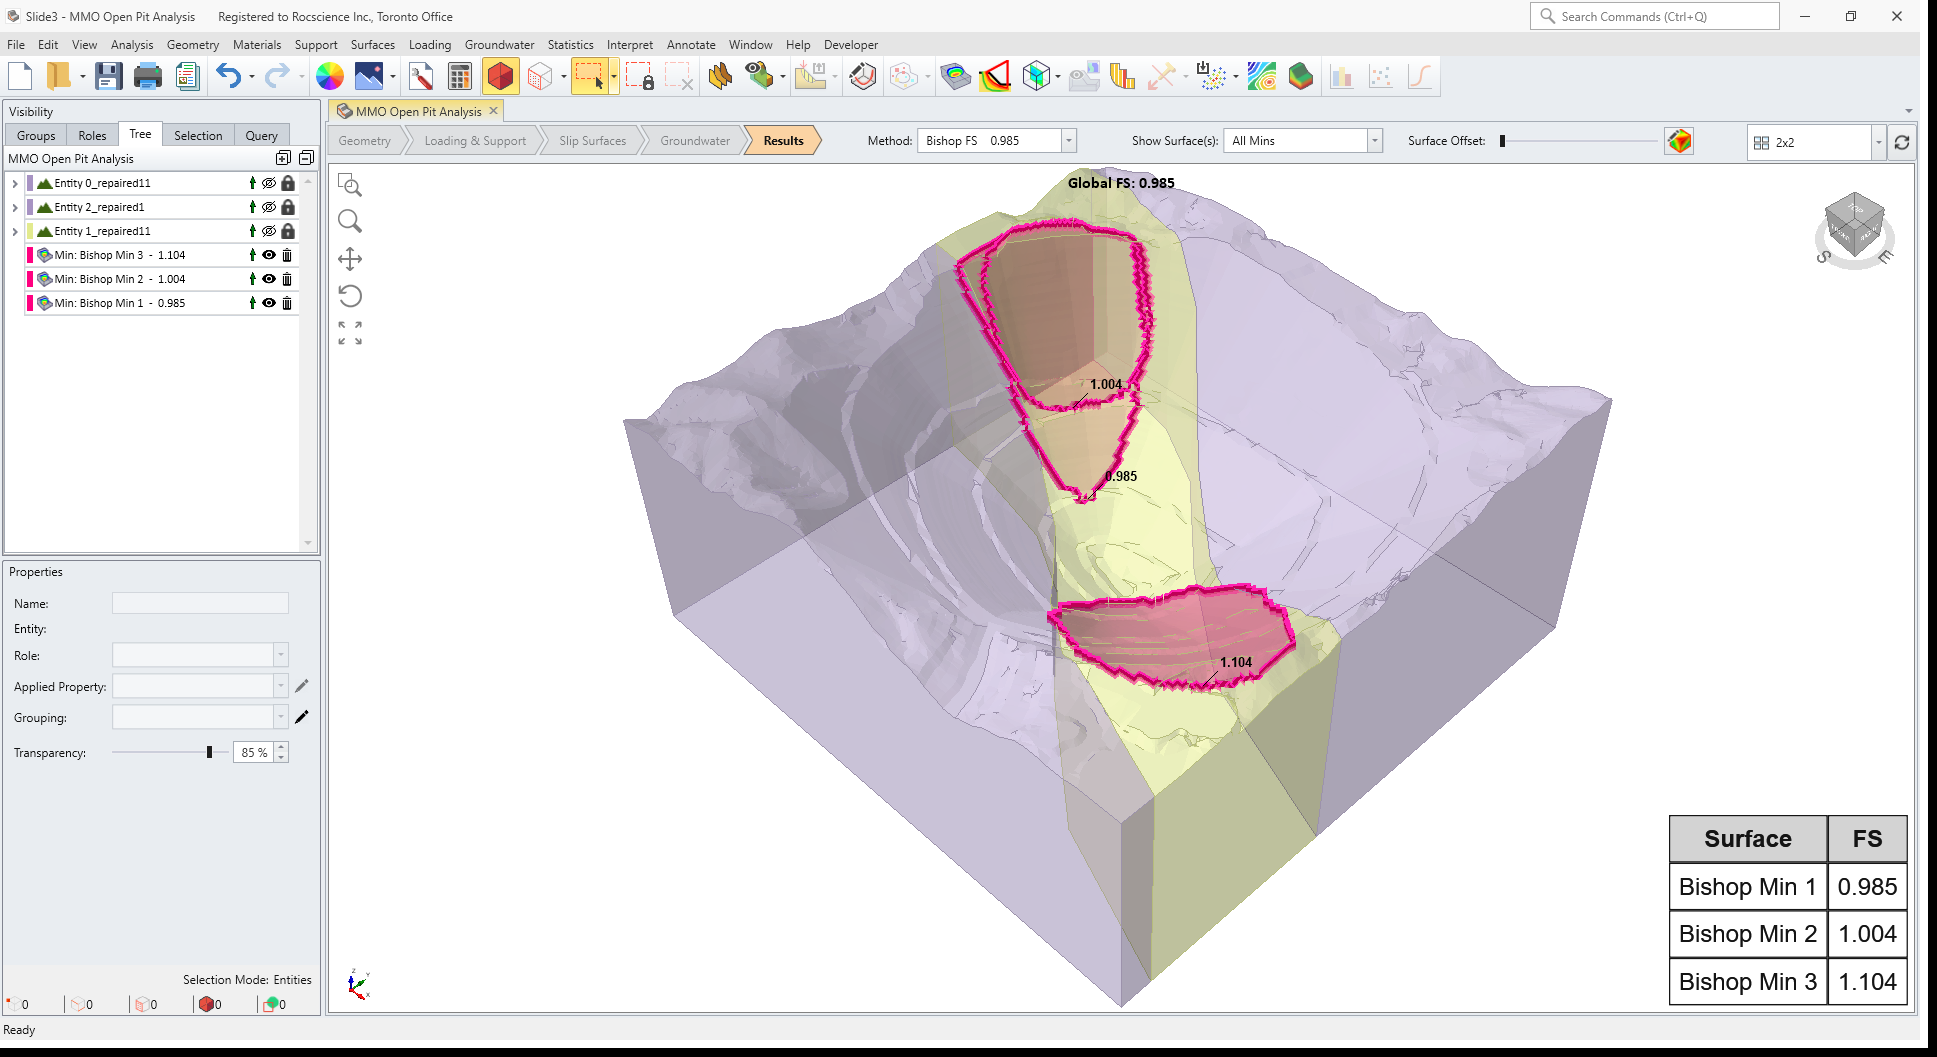 Results of Three Optimized Surfaces Model View